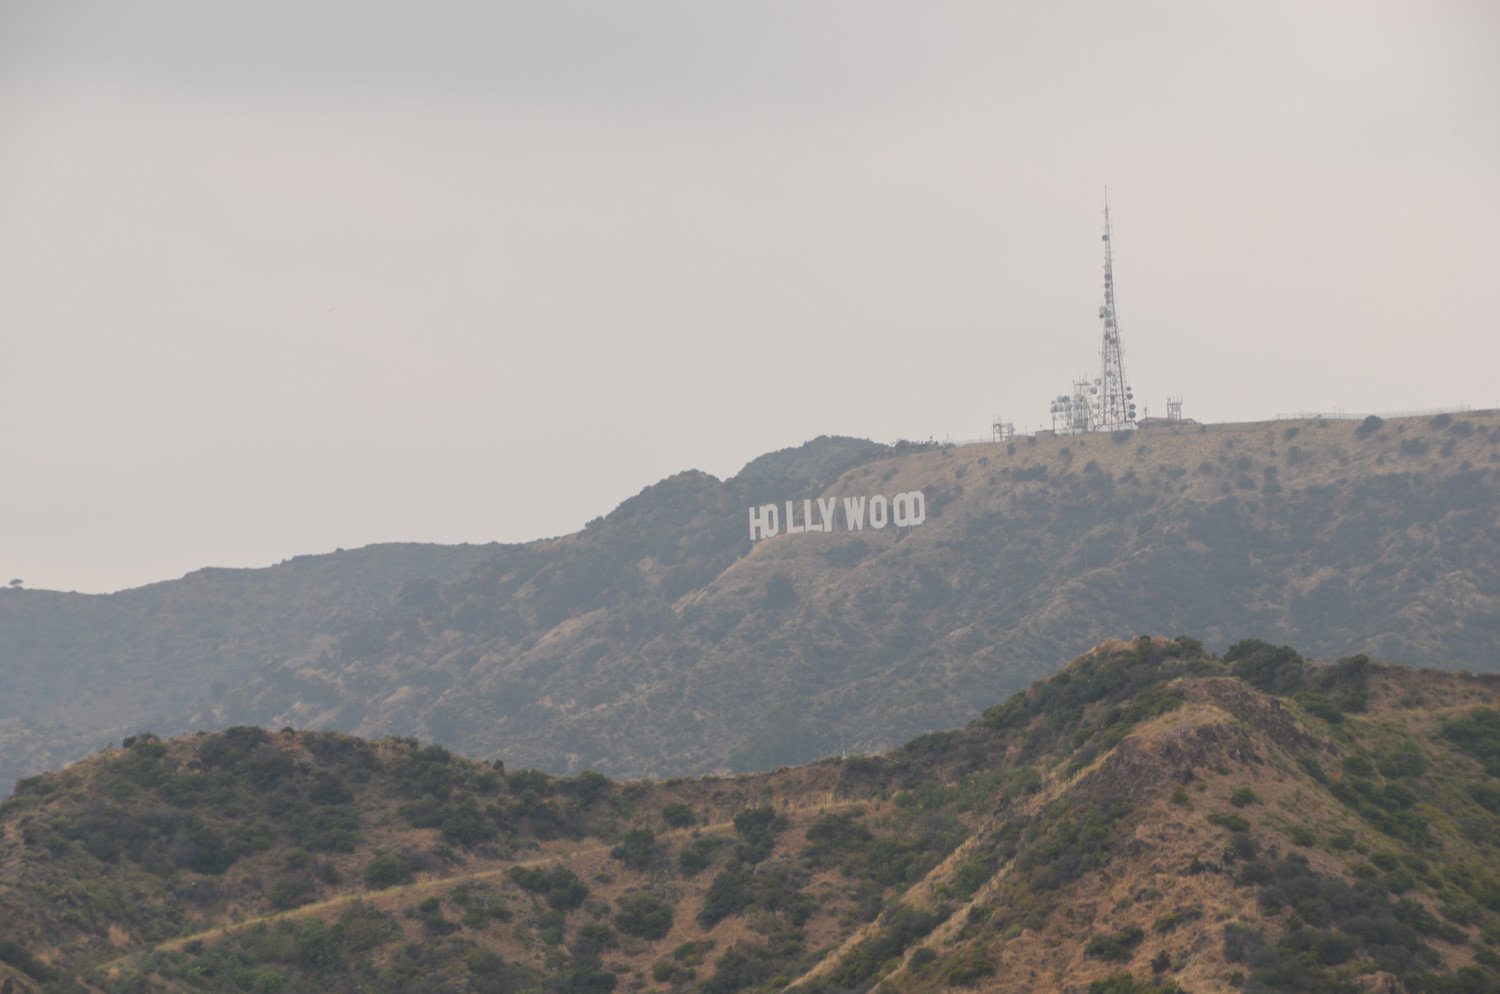 The Hollywood sign, as seen from Griffith Observatiory, Los Angeles